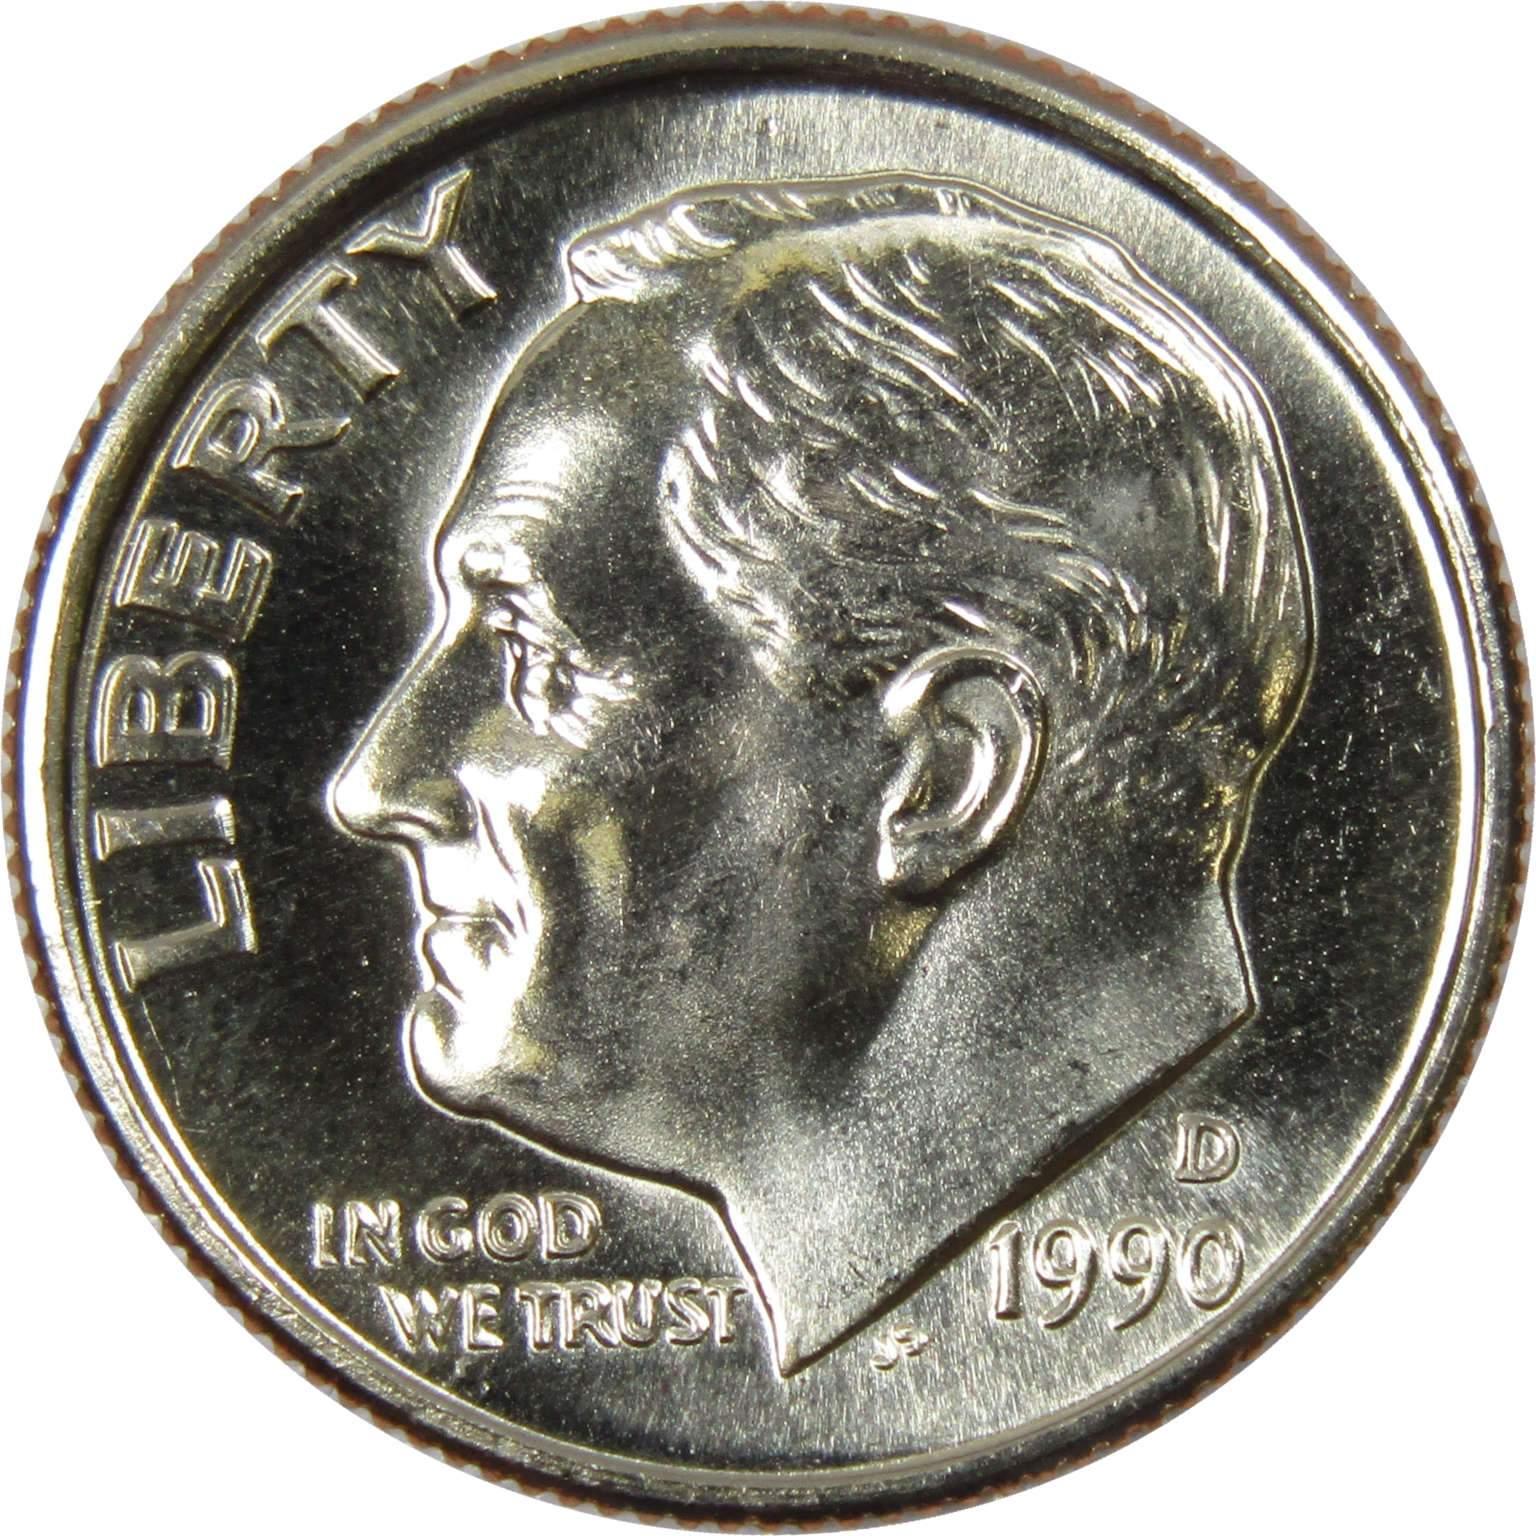 1990 D Roosevelt Dime BU Uncirculated Mint State 10c US Coin Collectible